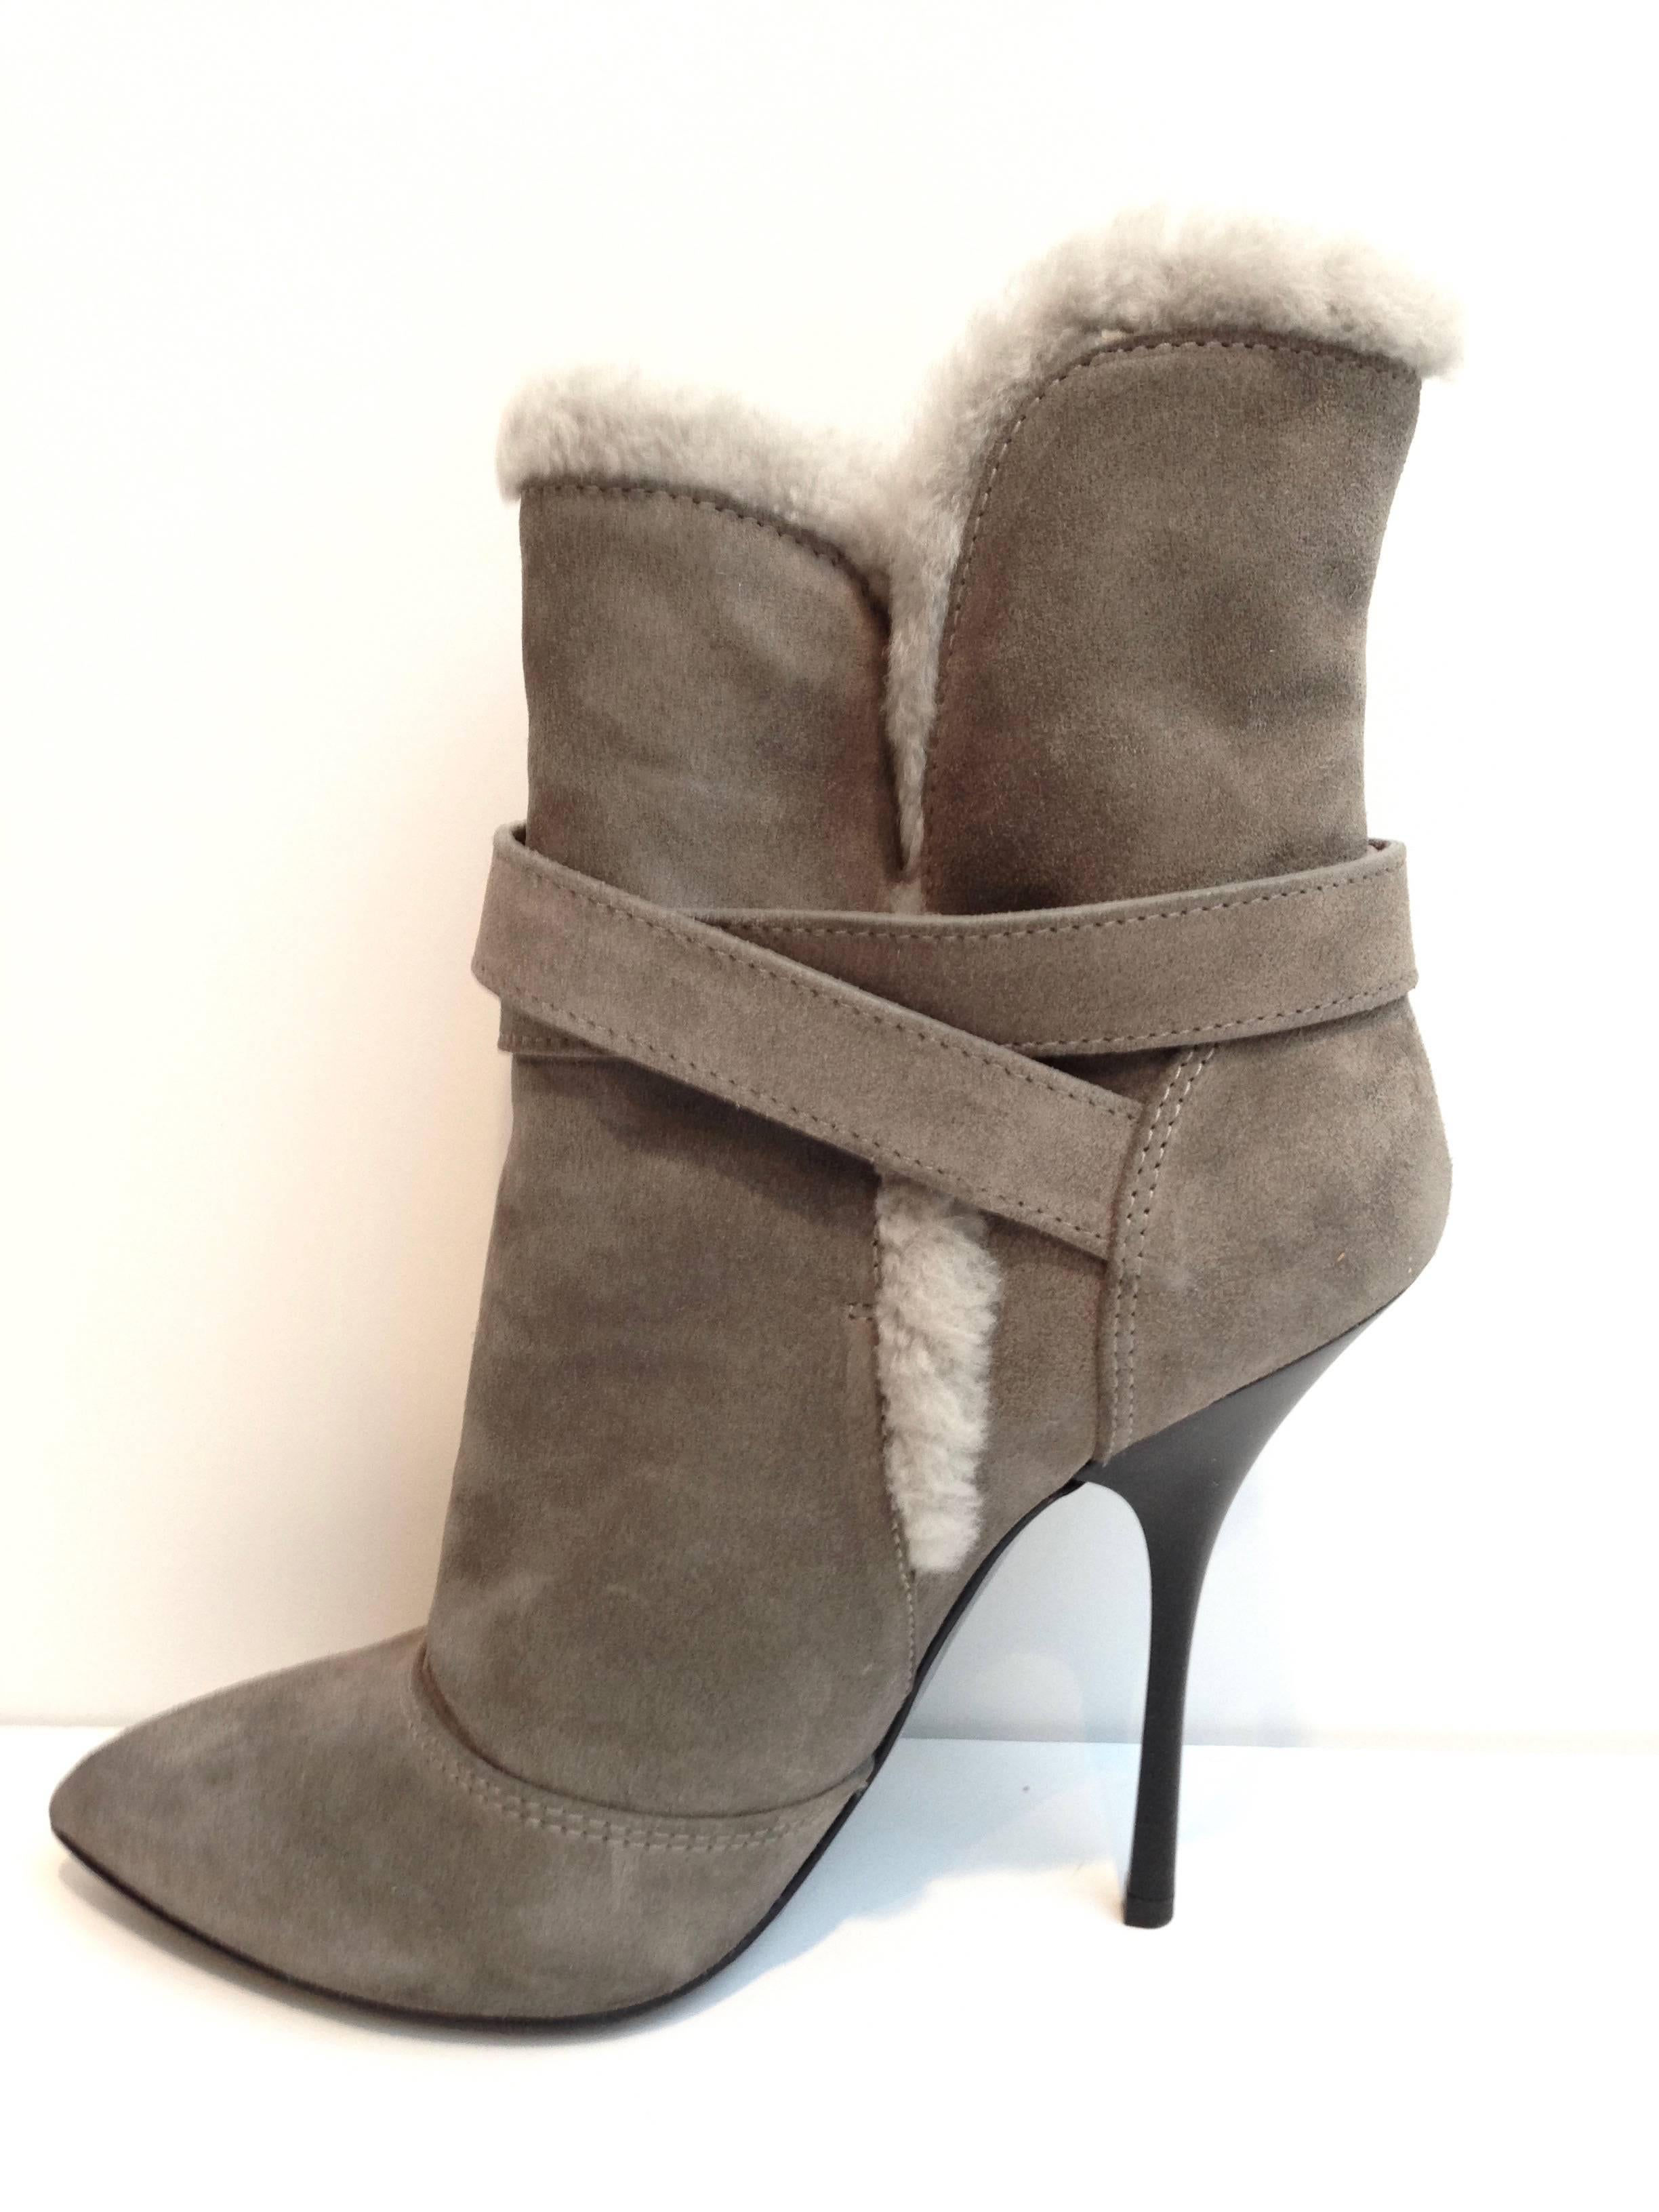 GIUSEPPE ZANOTTI Gray Suede Shearling Ankle Stiletto Boots
Size 38 ITA / 7.5 US
In original box. Style# I17081
Retail: $895.00
Made in Italy
 
Gray sueded ankle boots a faux fur trim and interior, silver-tone buckle, pointed toe and stiletto